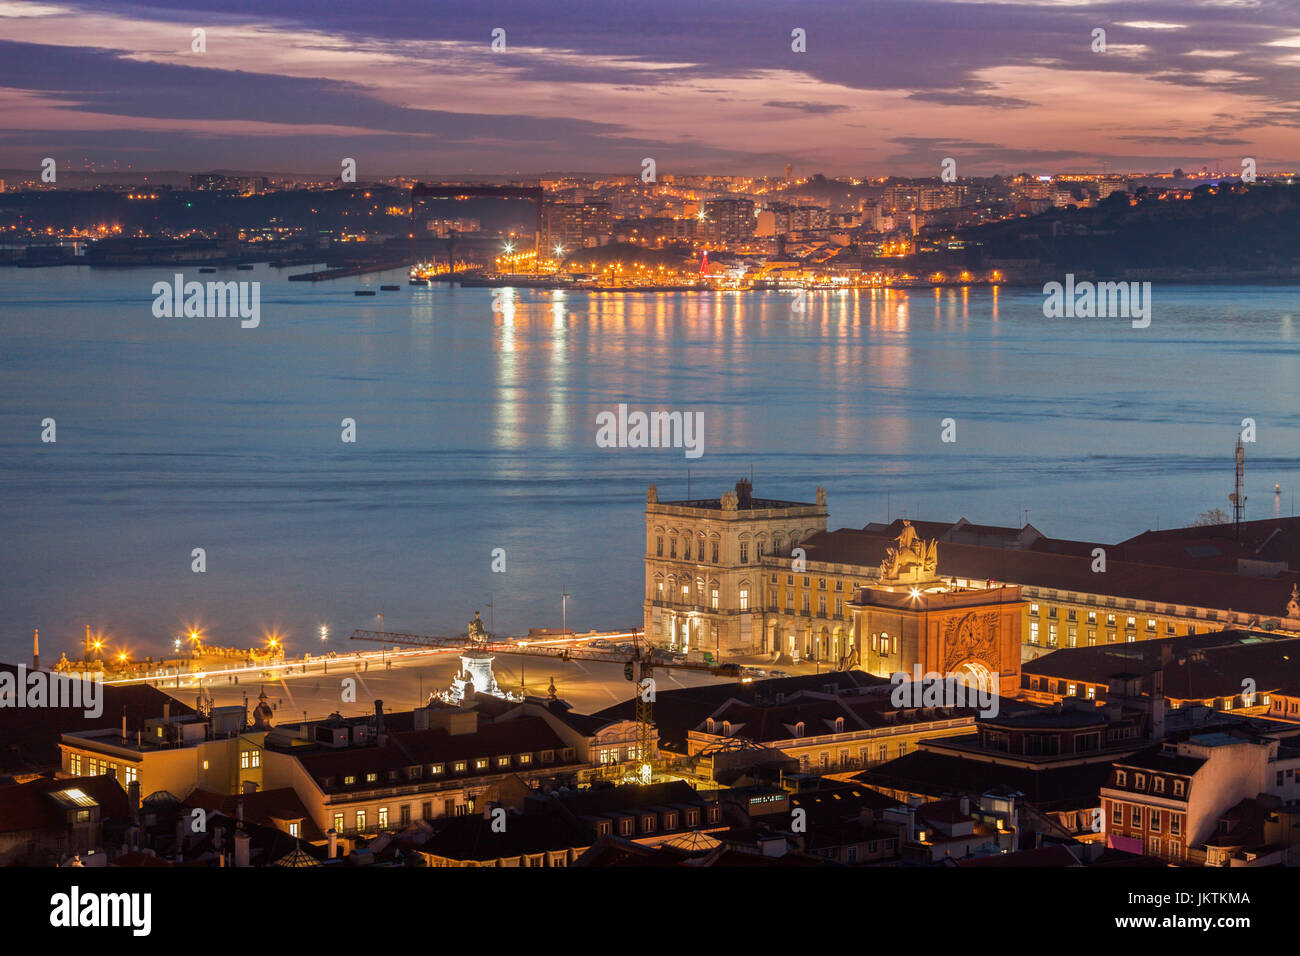 Plaza of Comerce in Lisbon and Tagus River. Lisbon, Portugal. Stock Photo